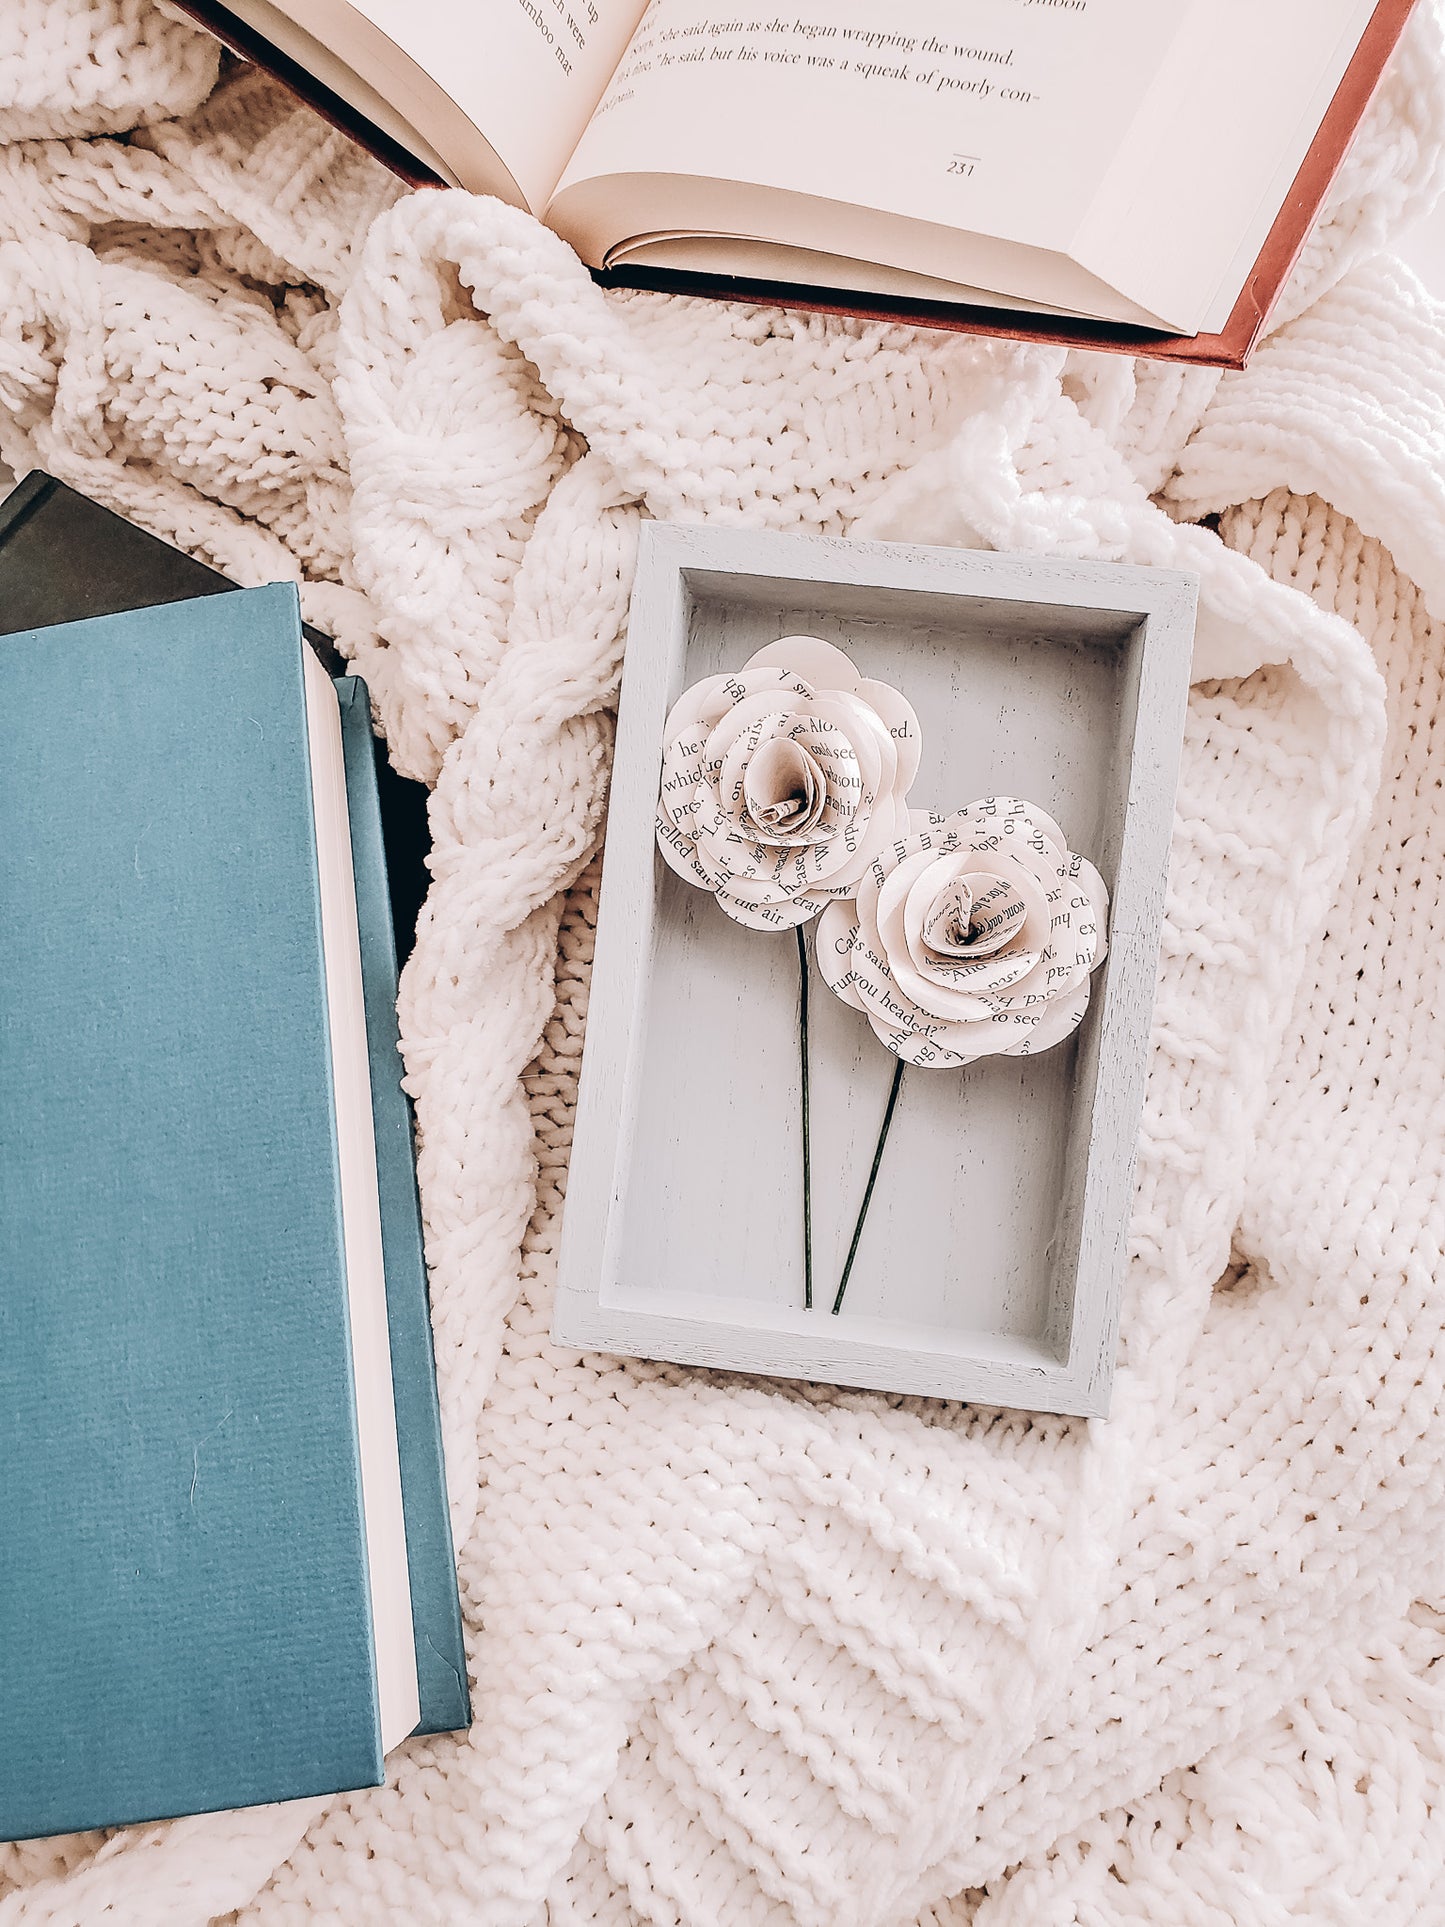 framed paper flowers made from book pages lying on a cable-knit sweater blanket and books scattered around - Novel Blossoms Co